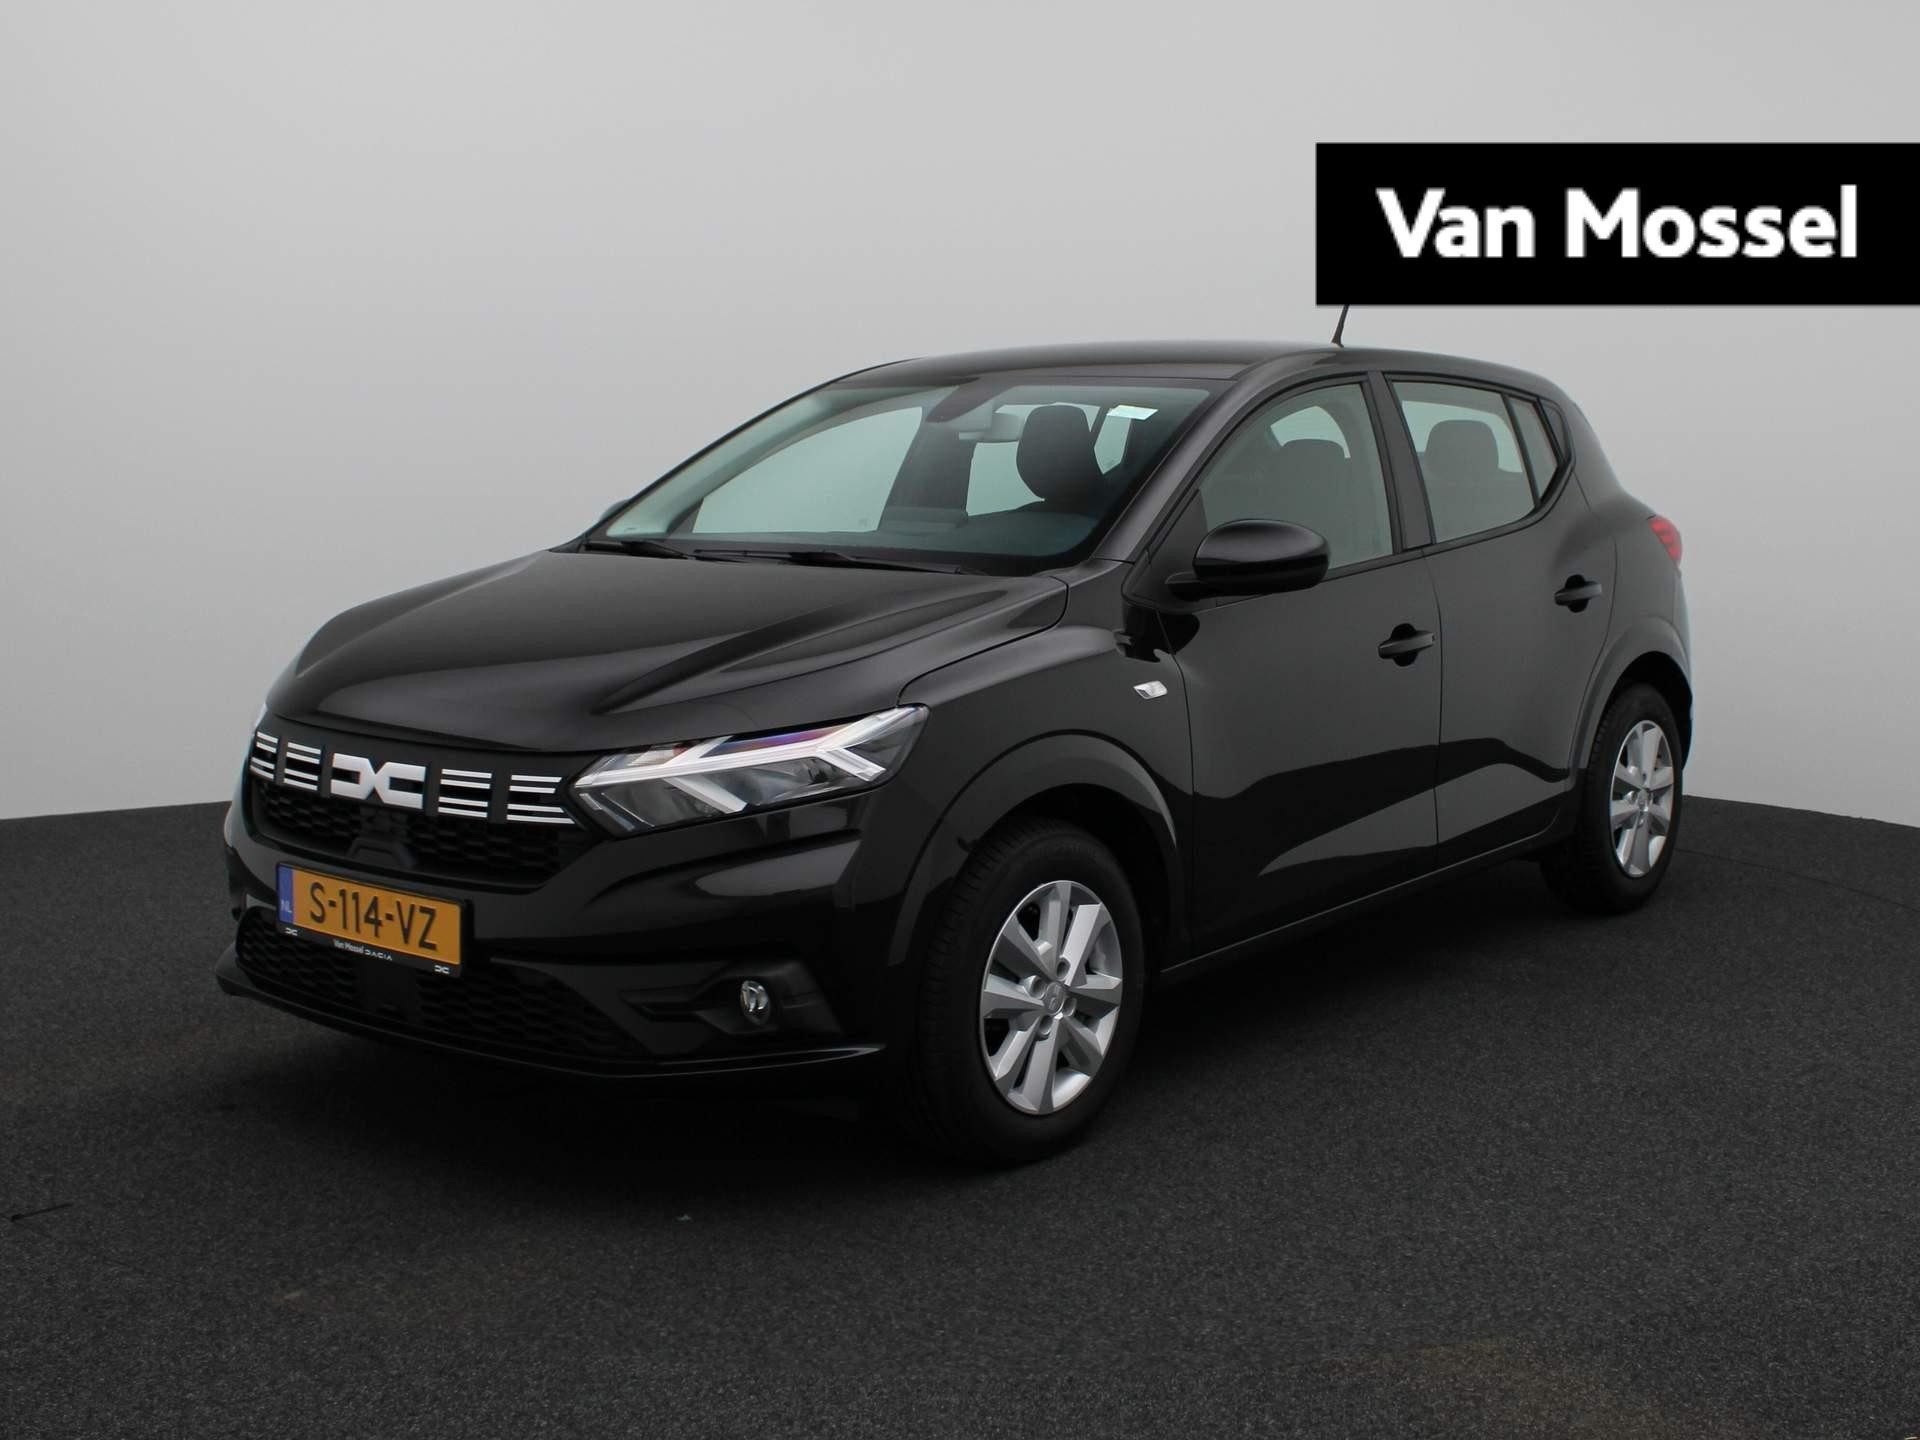 Dacia Sandero 1.0 TCe 90 Expression | Pack MediaNav | PDC Achter | LED-verlichting | Licht- en regensensor | Airconditioning | Apple Carplay & Android Auto